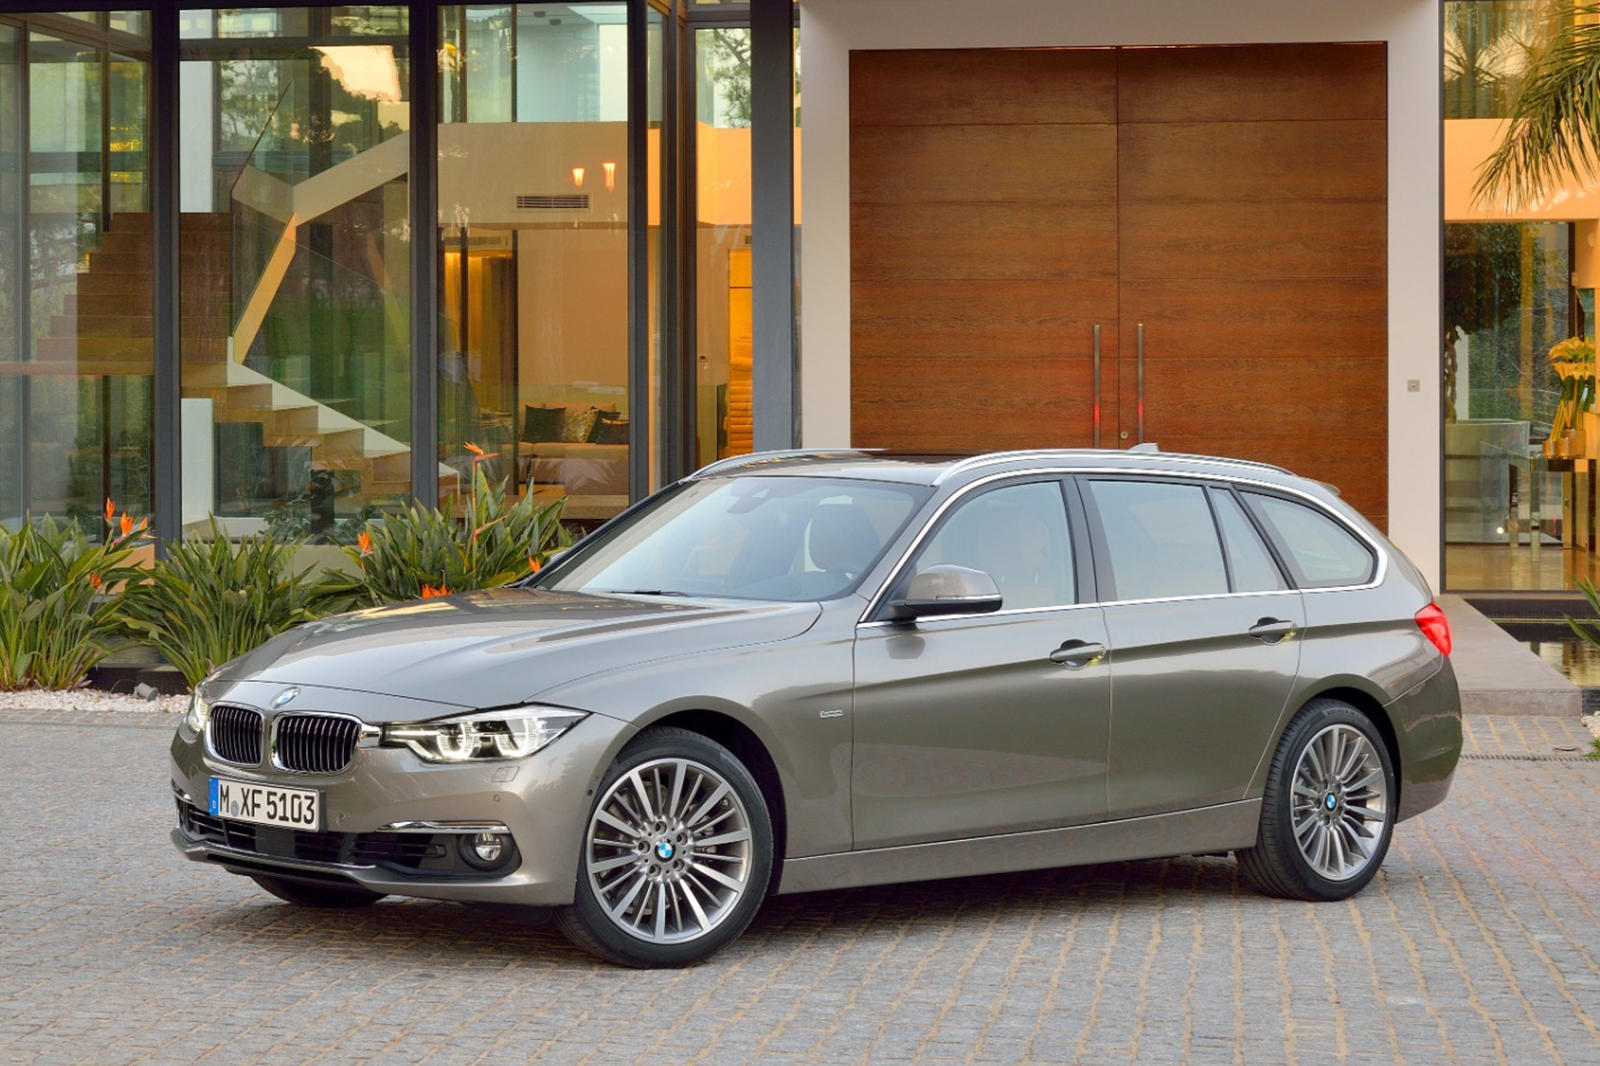 2017 BMW 3 Series Wagon Front Three-Quarter Left Side View